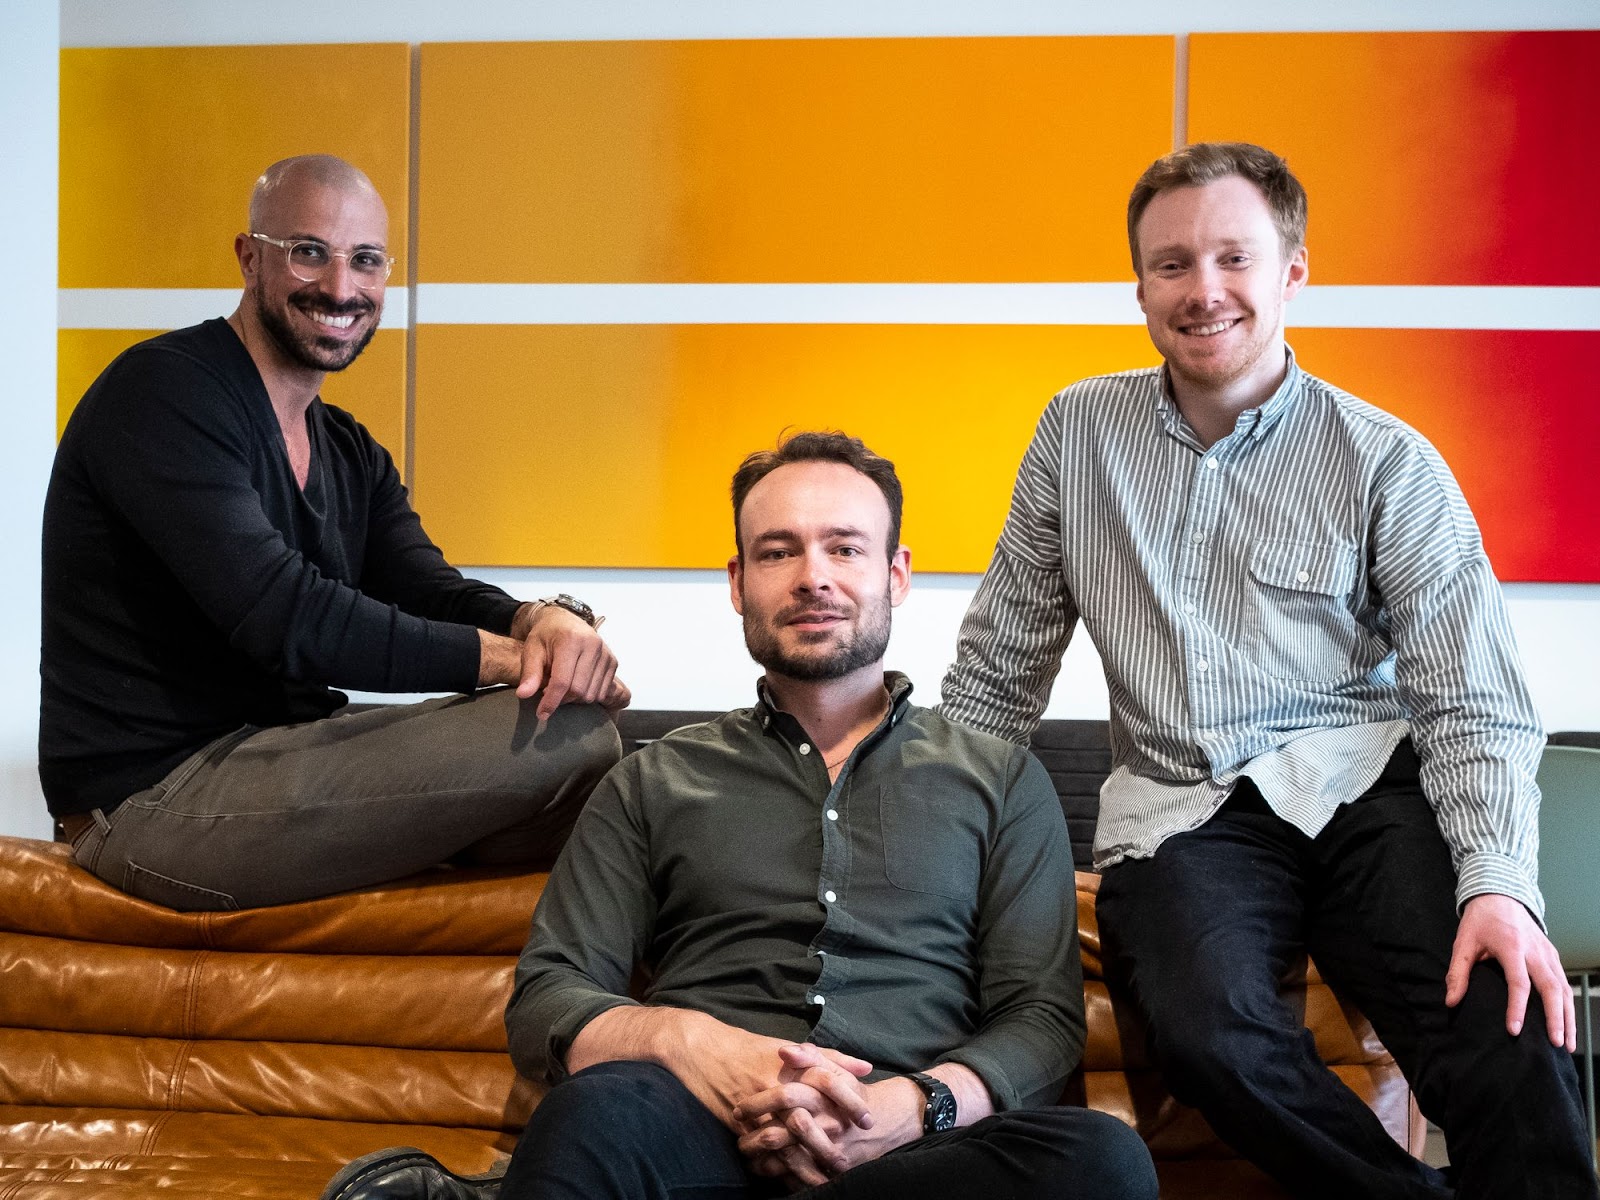 Fintech Mast Raises £1.2M to Accelerate Buildout of its Cloud-Native Mortgage Origination Infrastructure